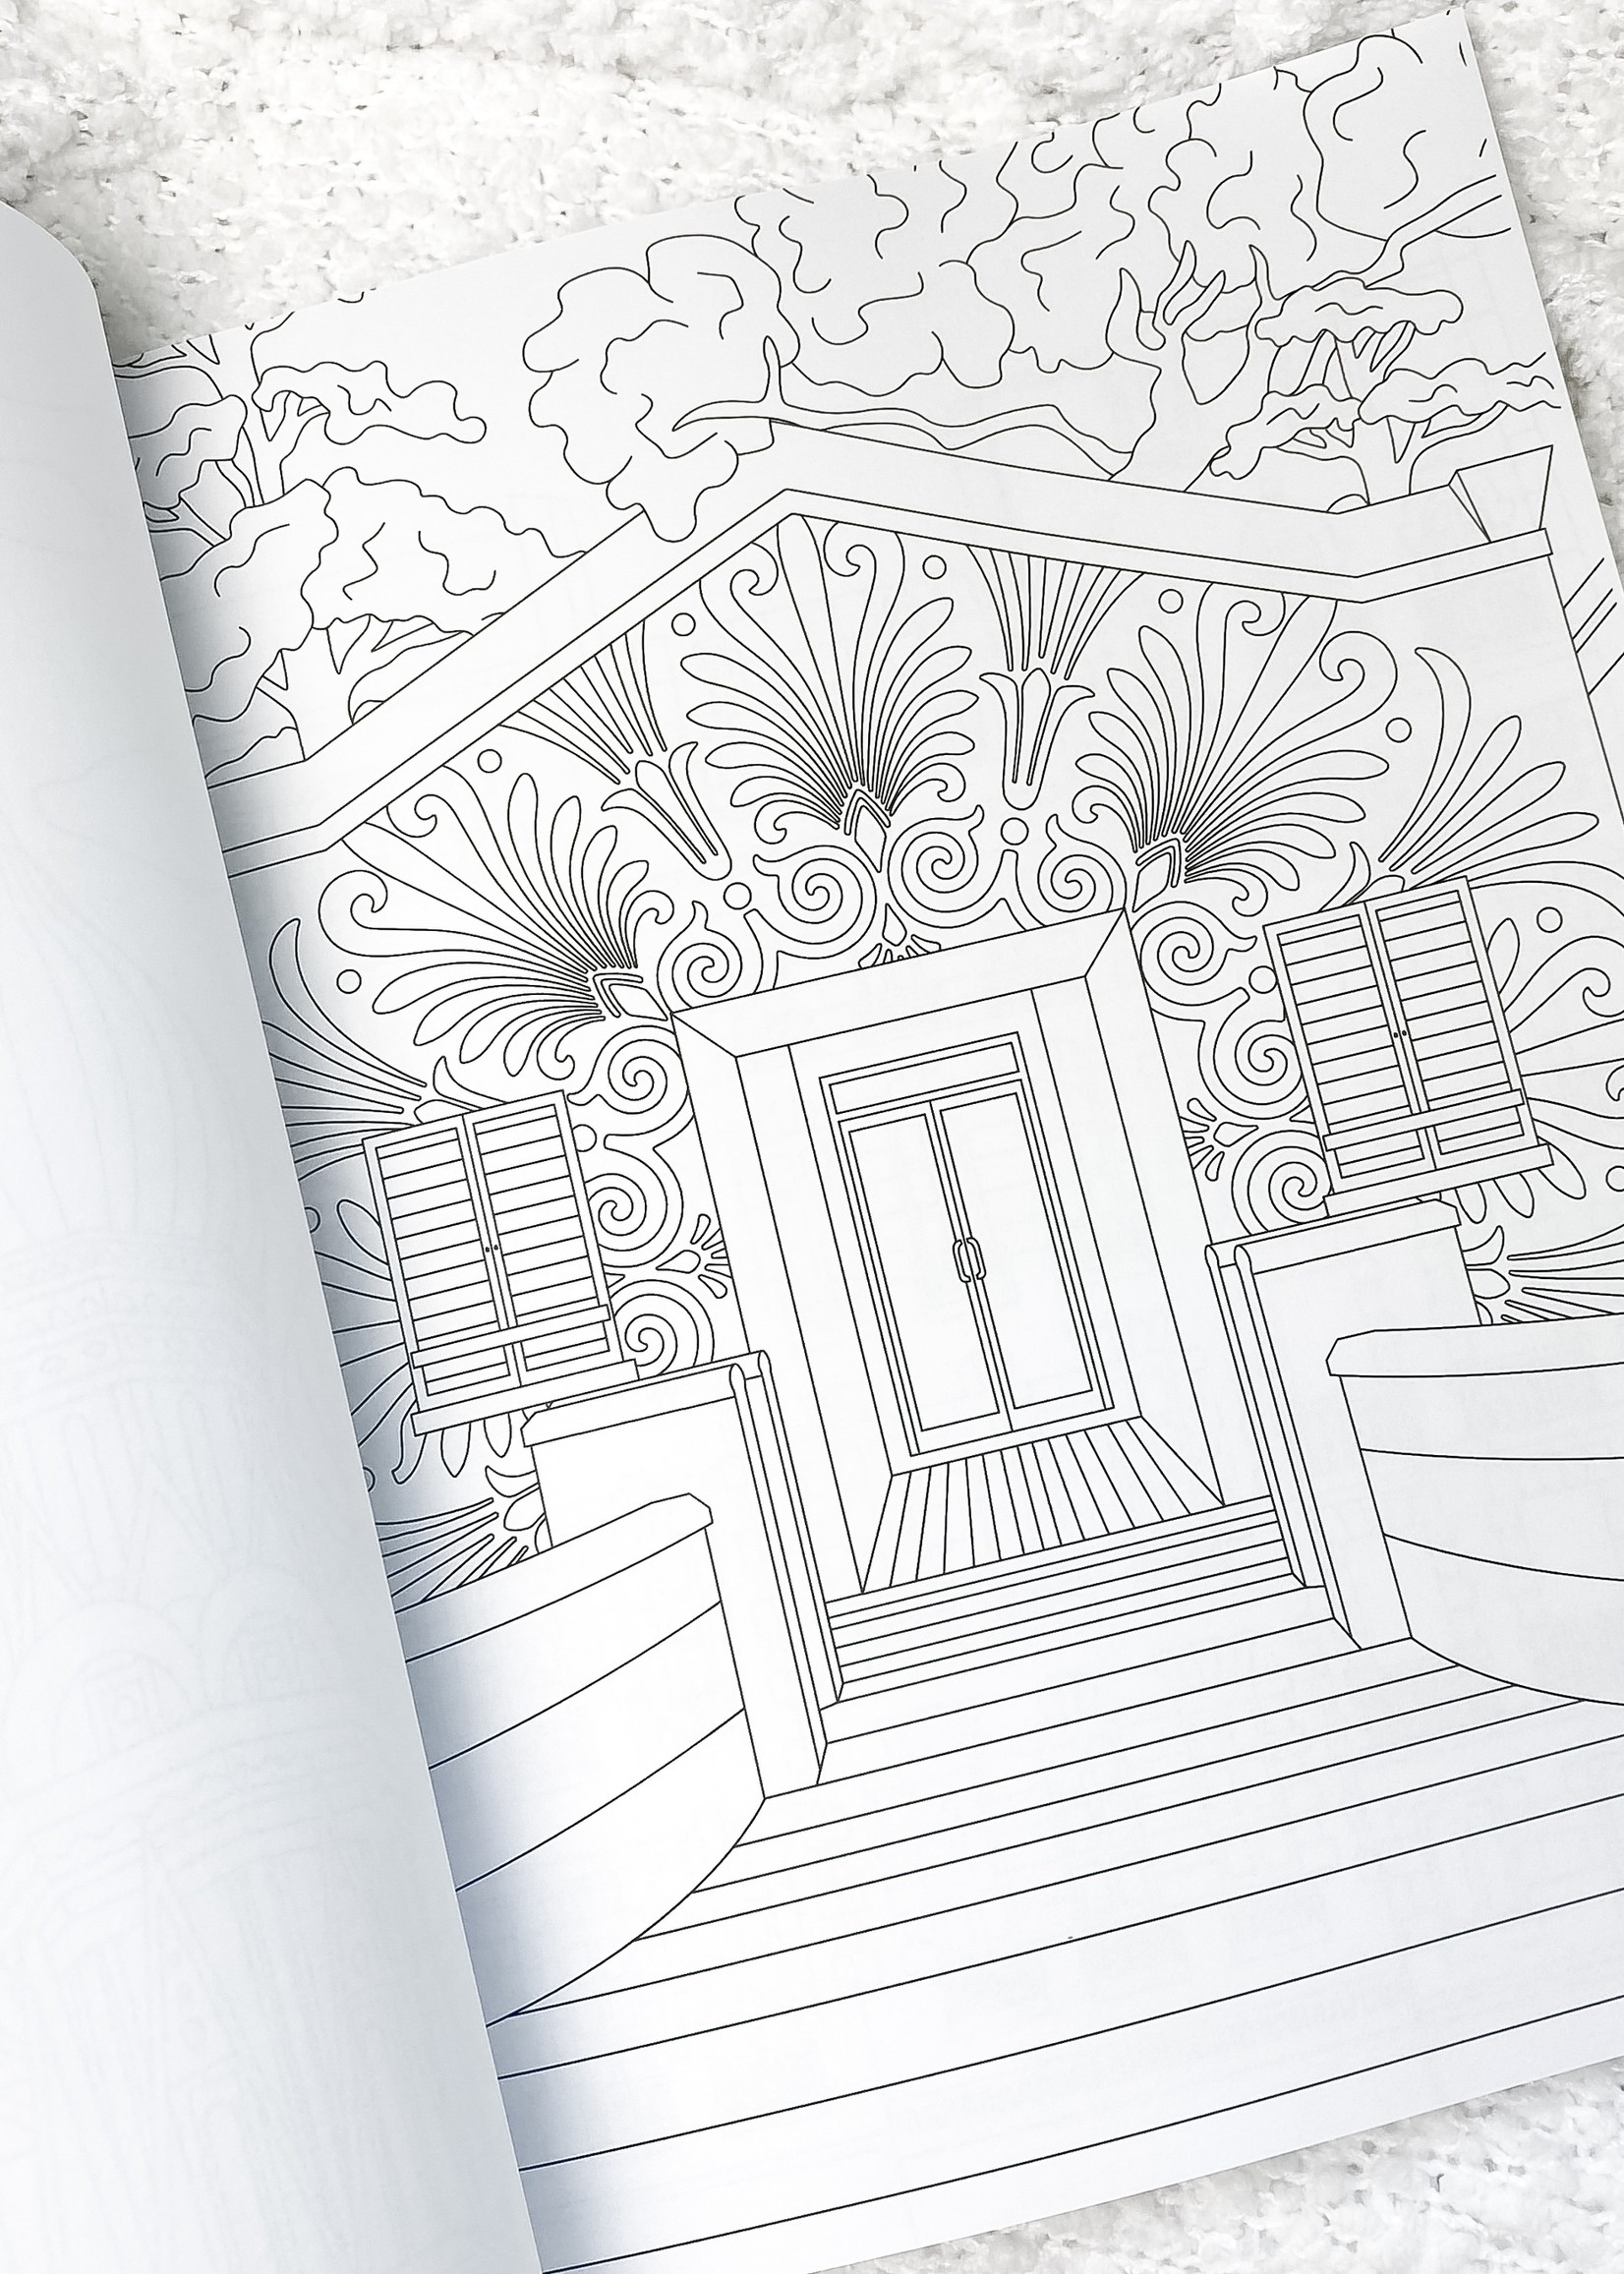 Beehive 95 Designs Architecture Coloring Book